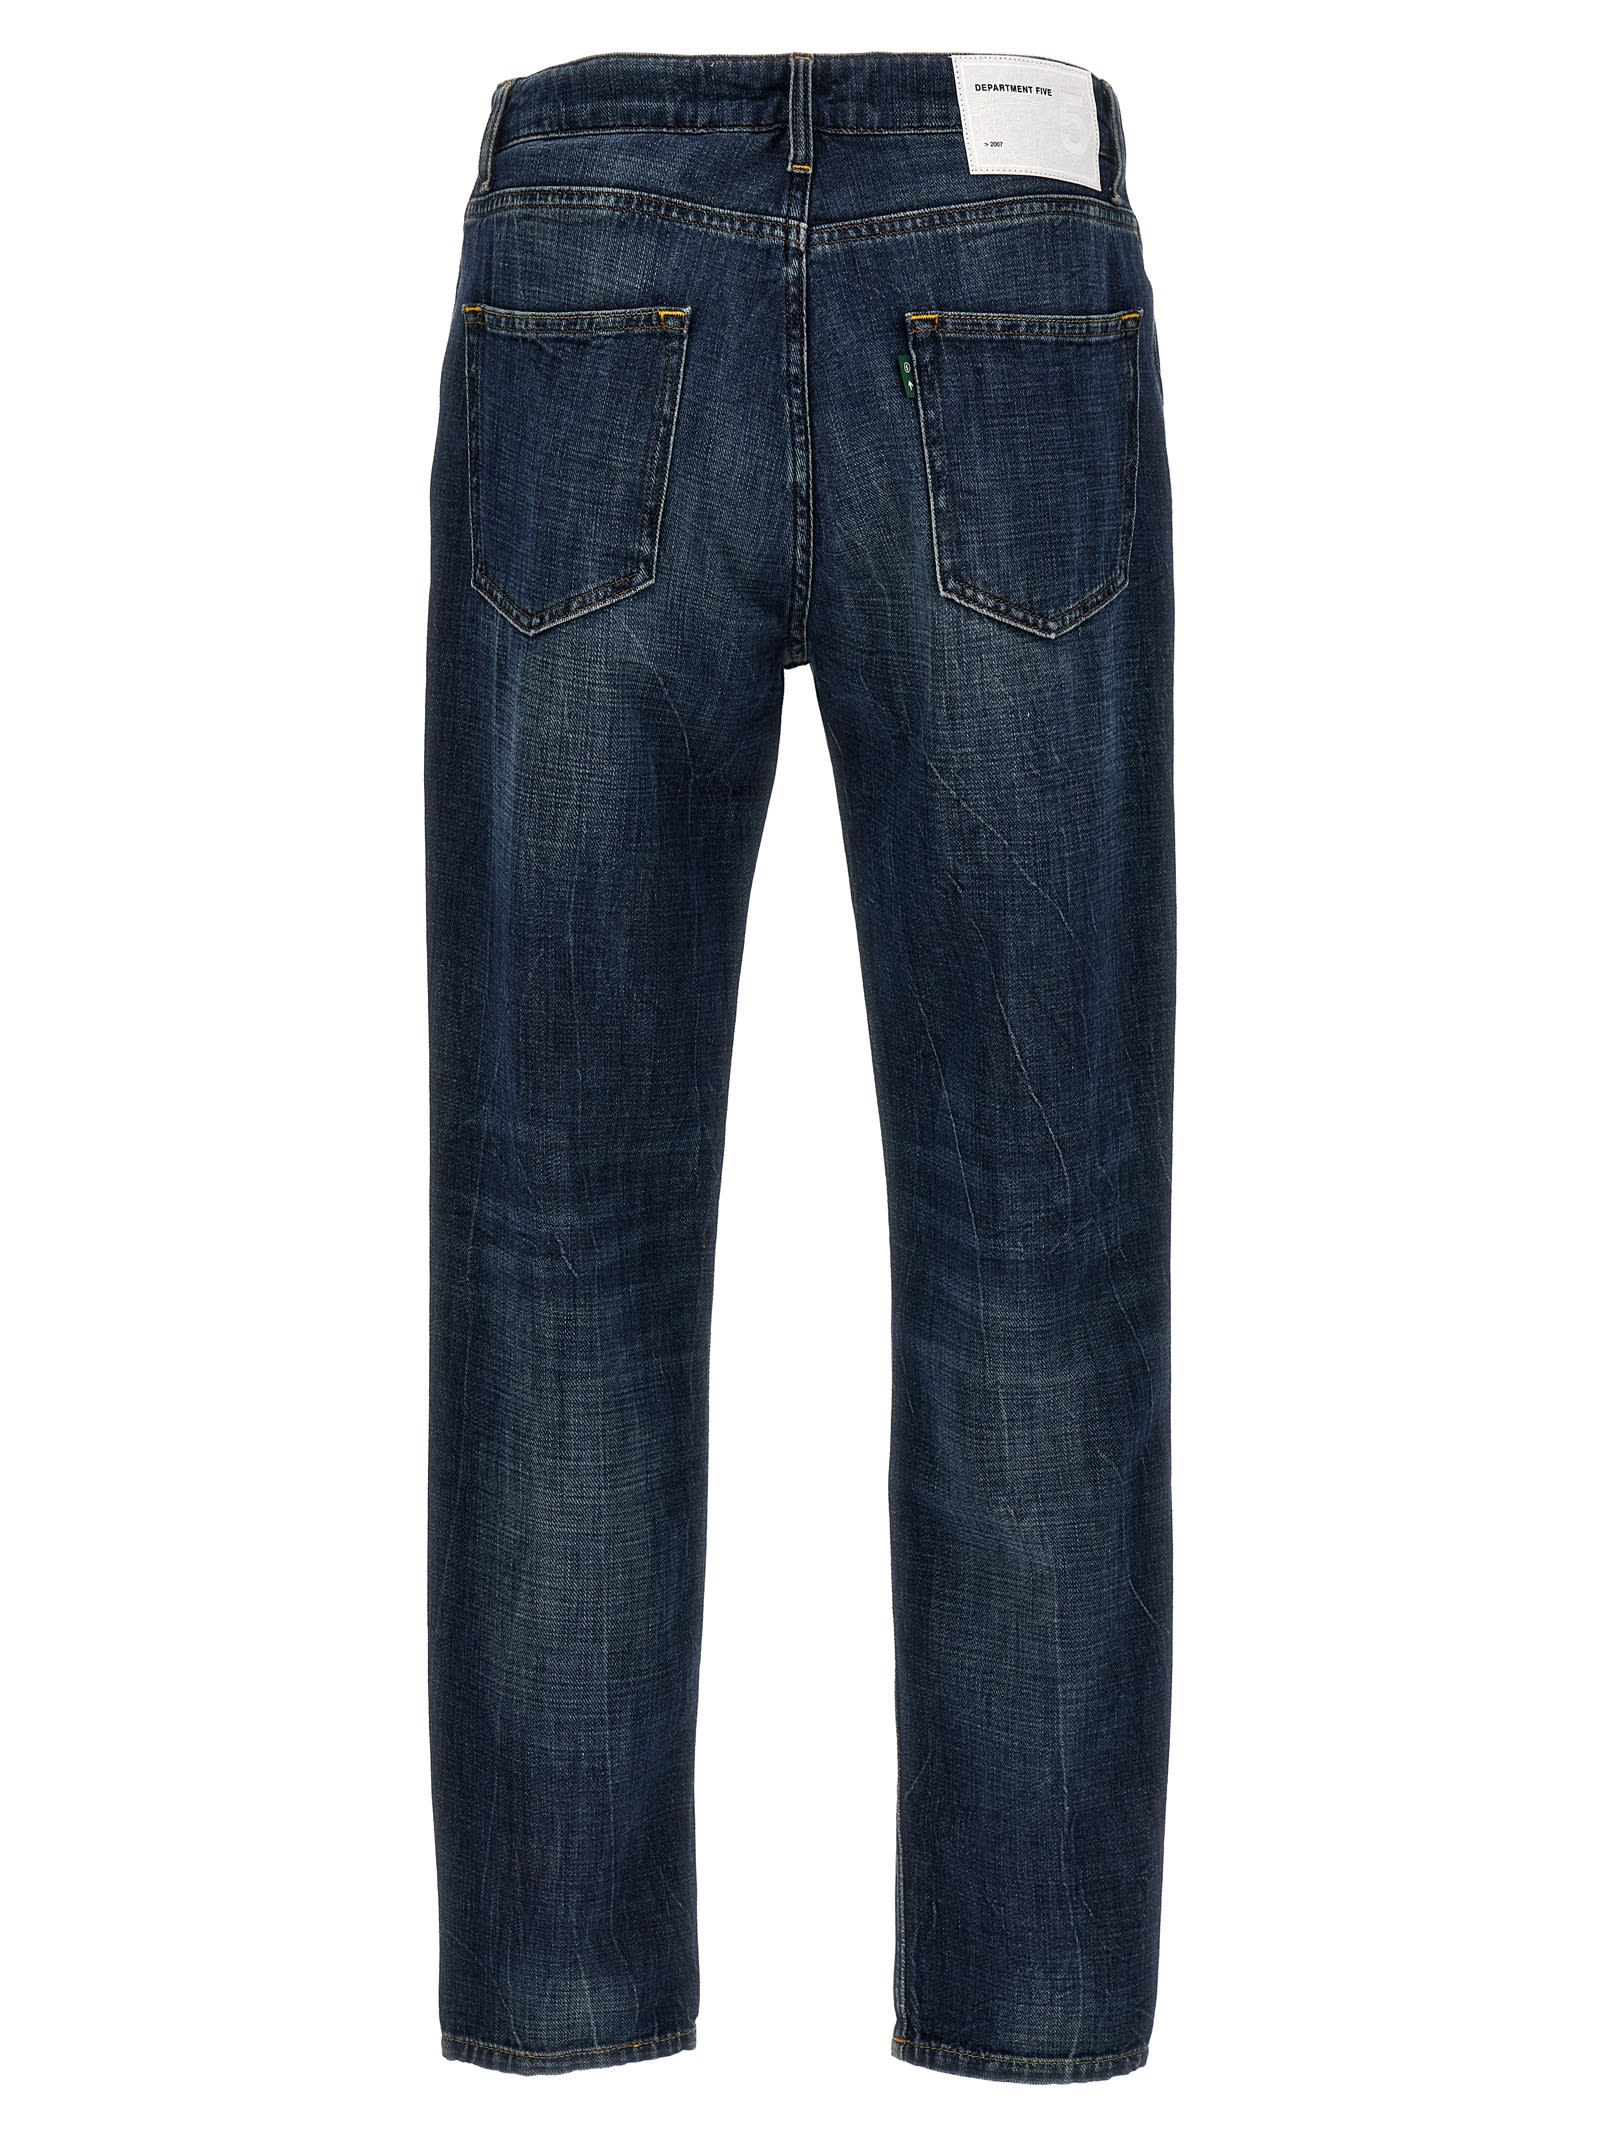 Shop Department Five Drake Jeans In Blue